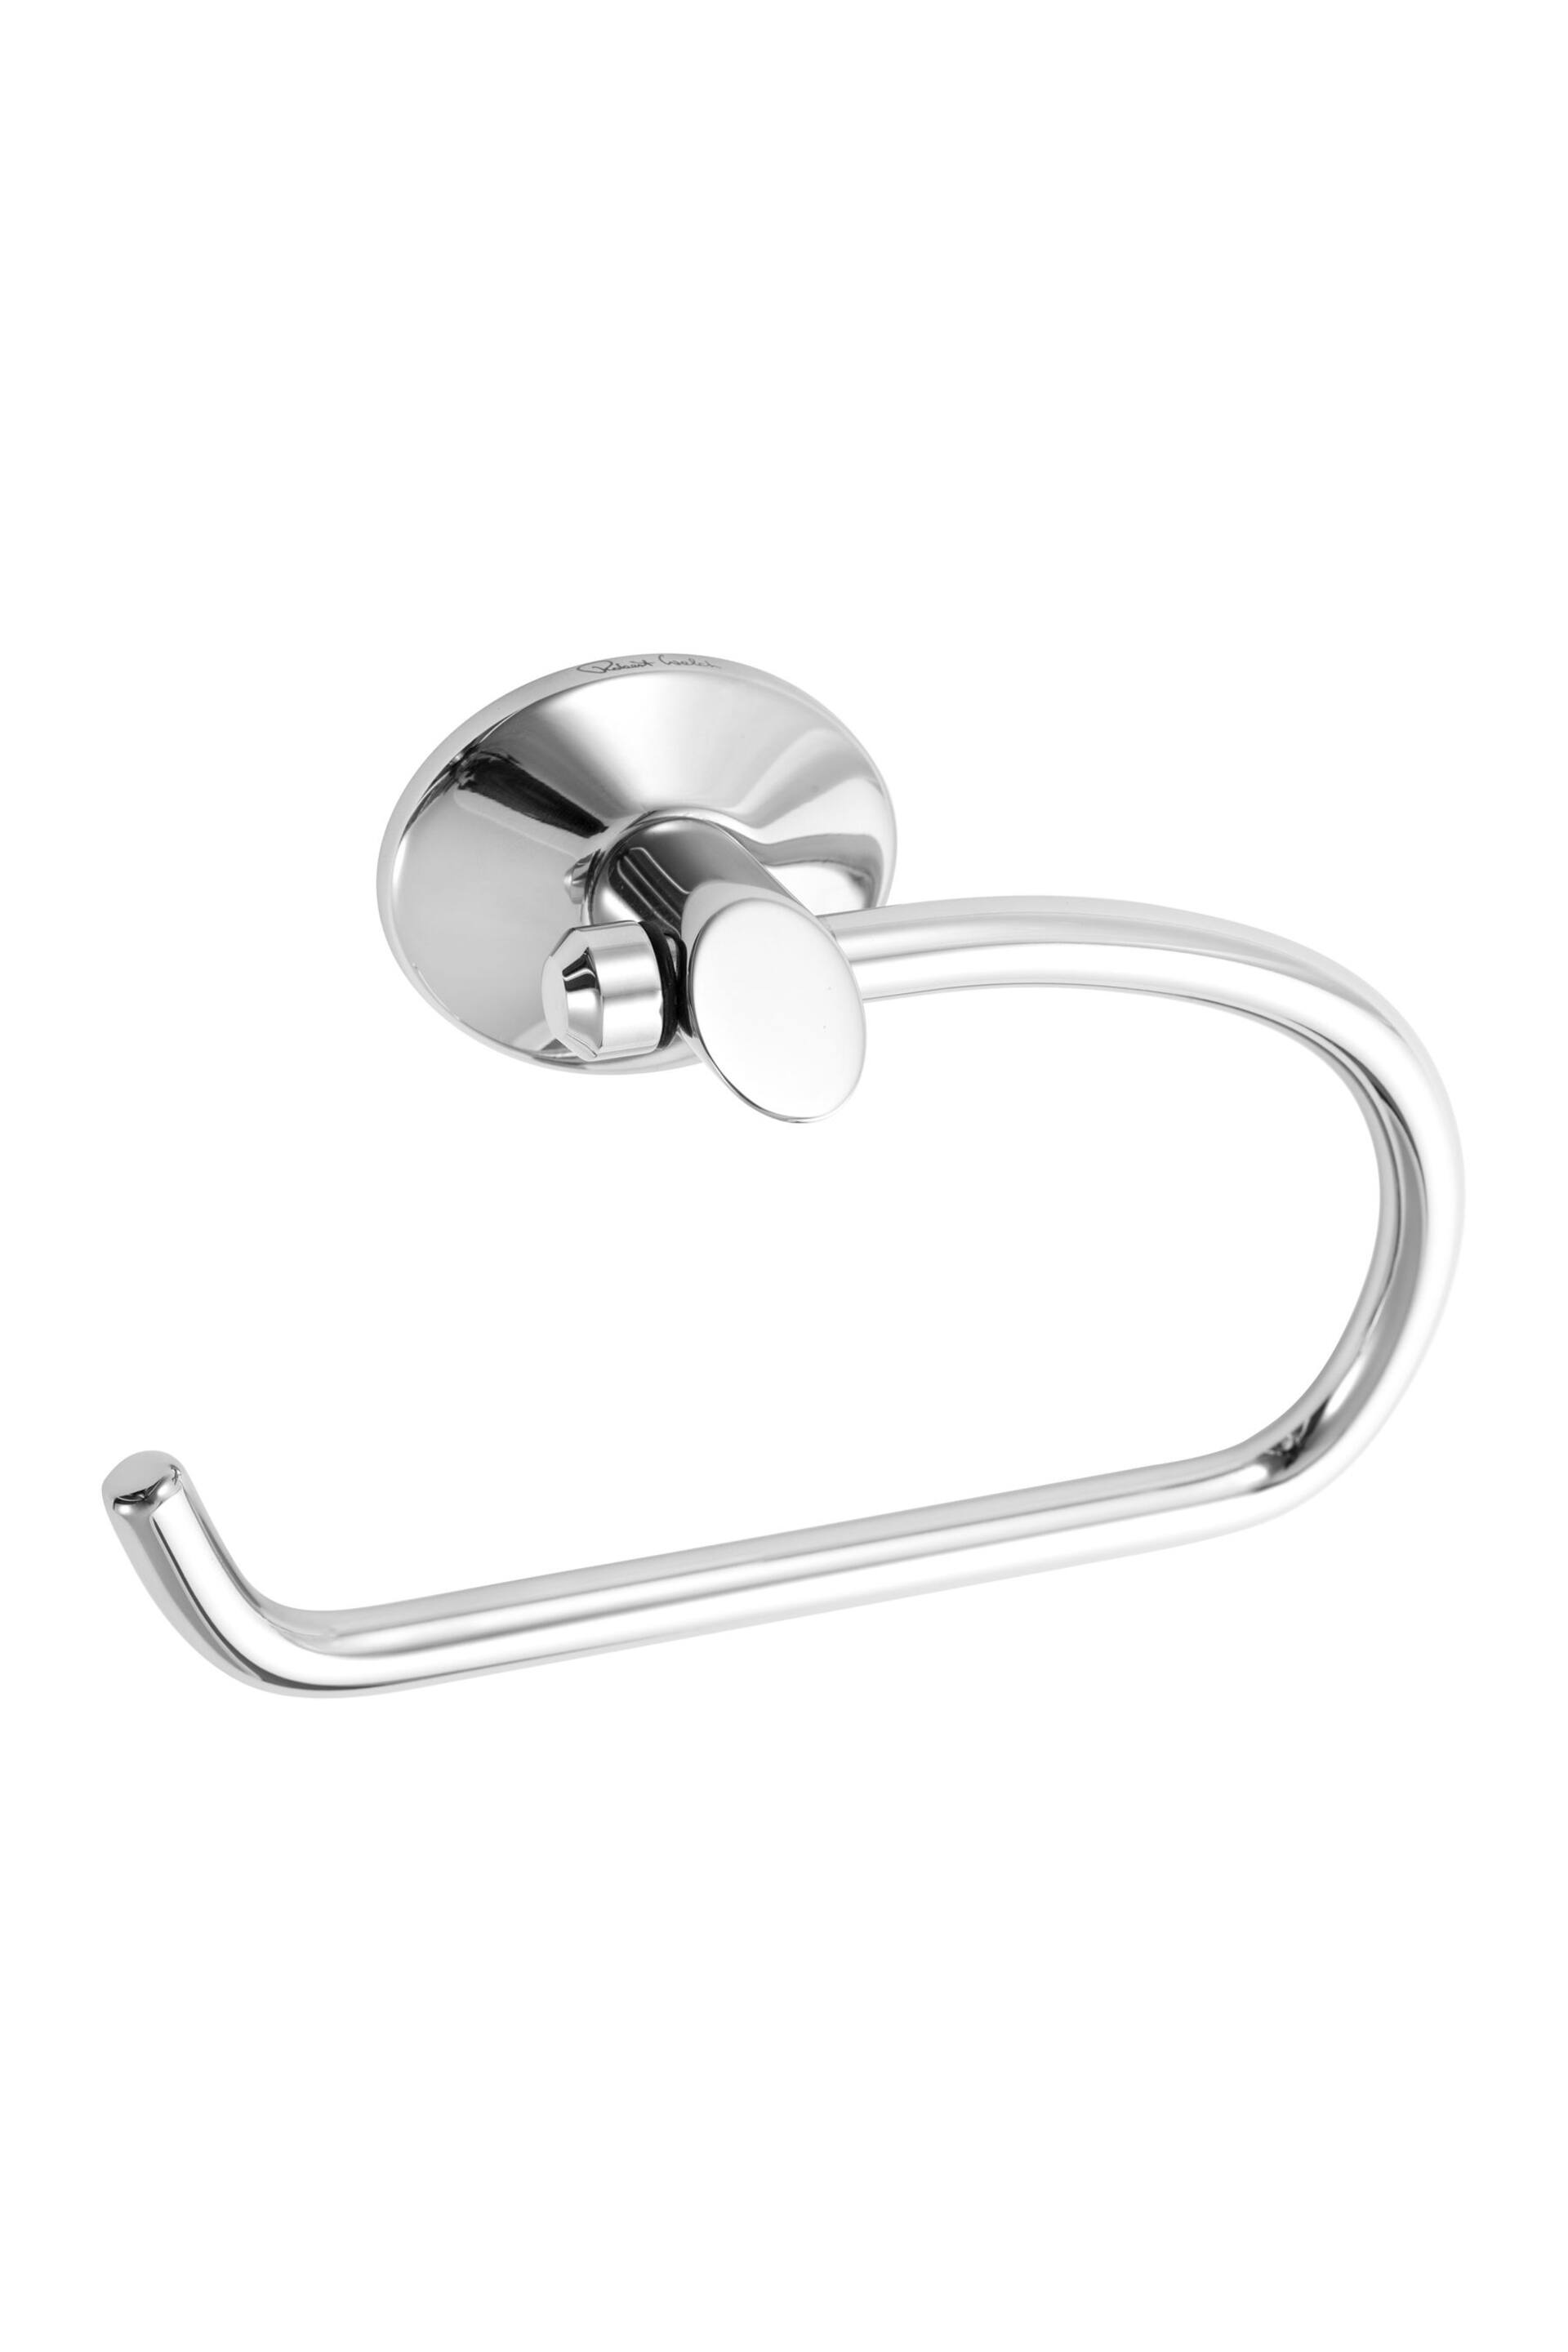 Robert Welch Silver Oblique Toilet Roll Holder - Image 3 of 4